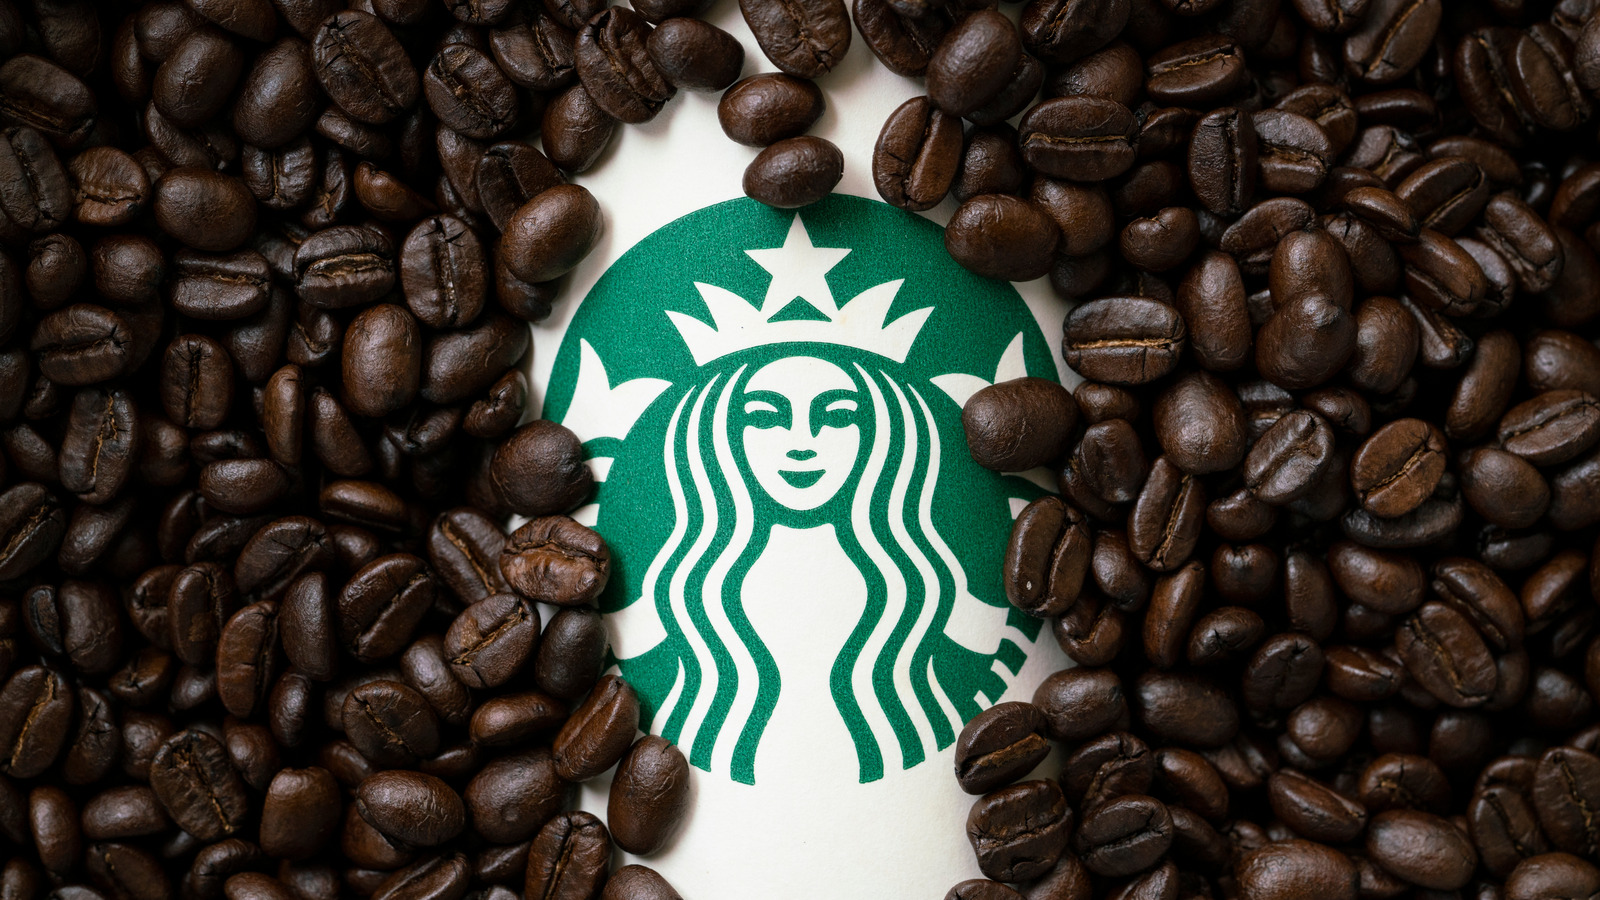 https://www.mashed.com/img/gallery/everything-we-know-about-starbucks-espresso-shot-recall/l-intro-1663088680.jpg